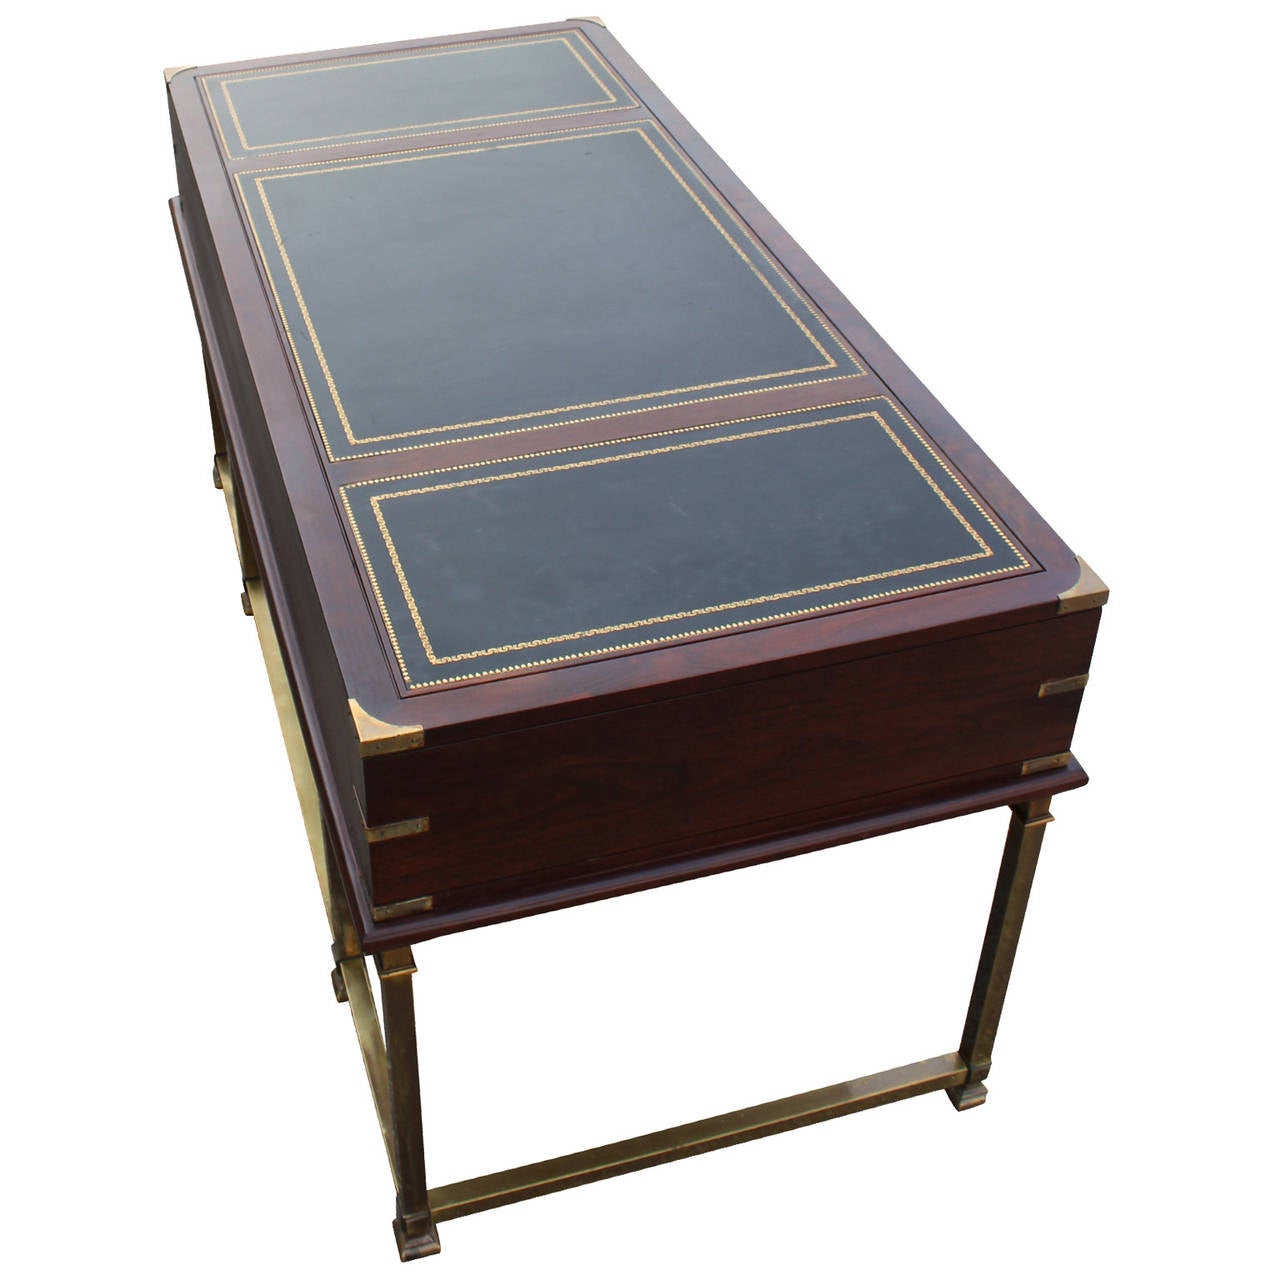 Excellent Campaign Style Desk with Brass Accents 1